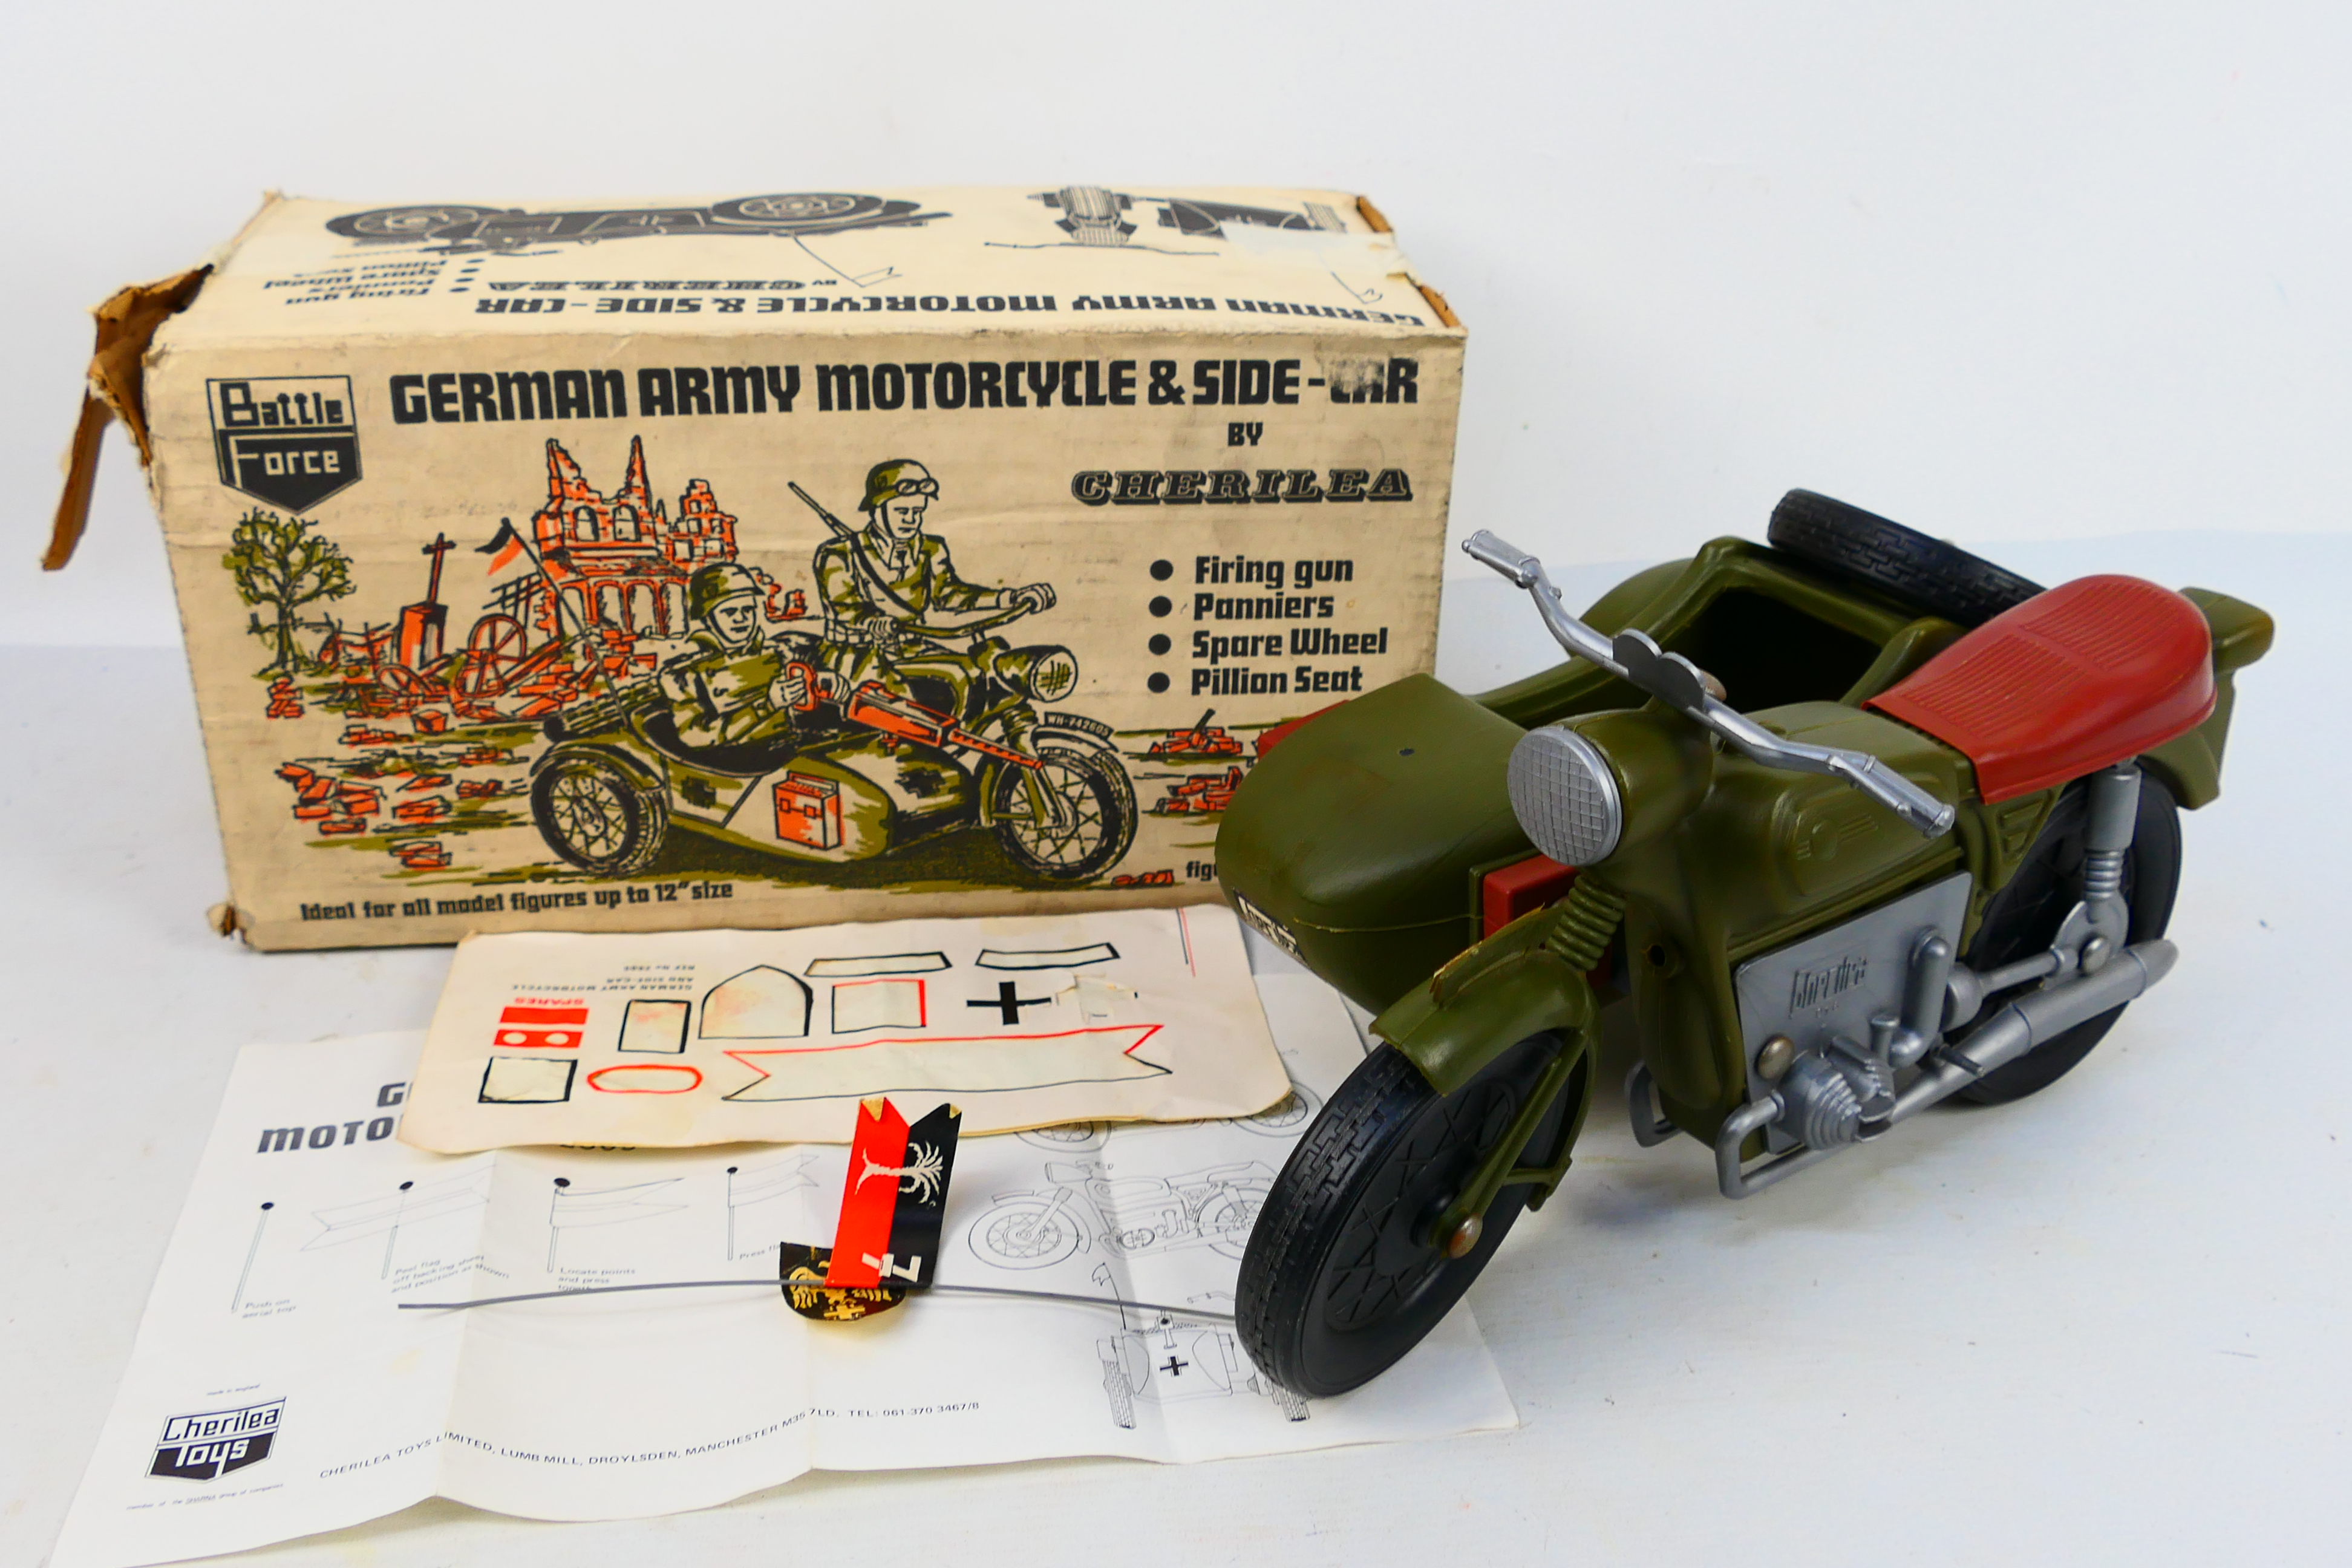 Cherilea Toys - Battle Force. A boxed Cherilea Toys made German Army Motorcycle & Sidecar #2605.